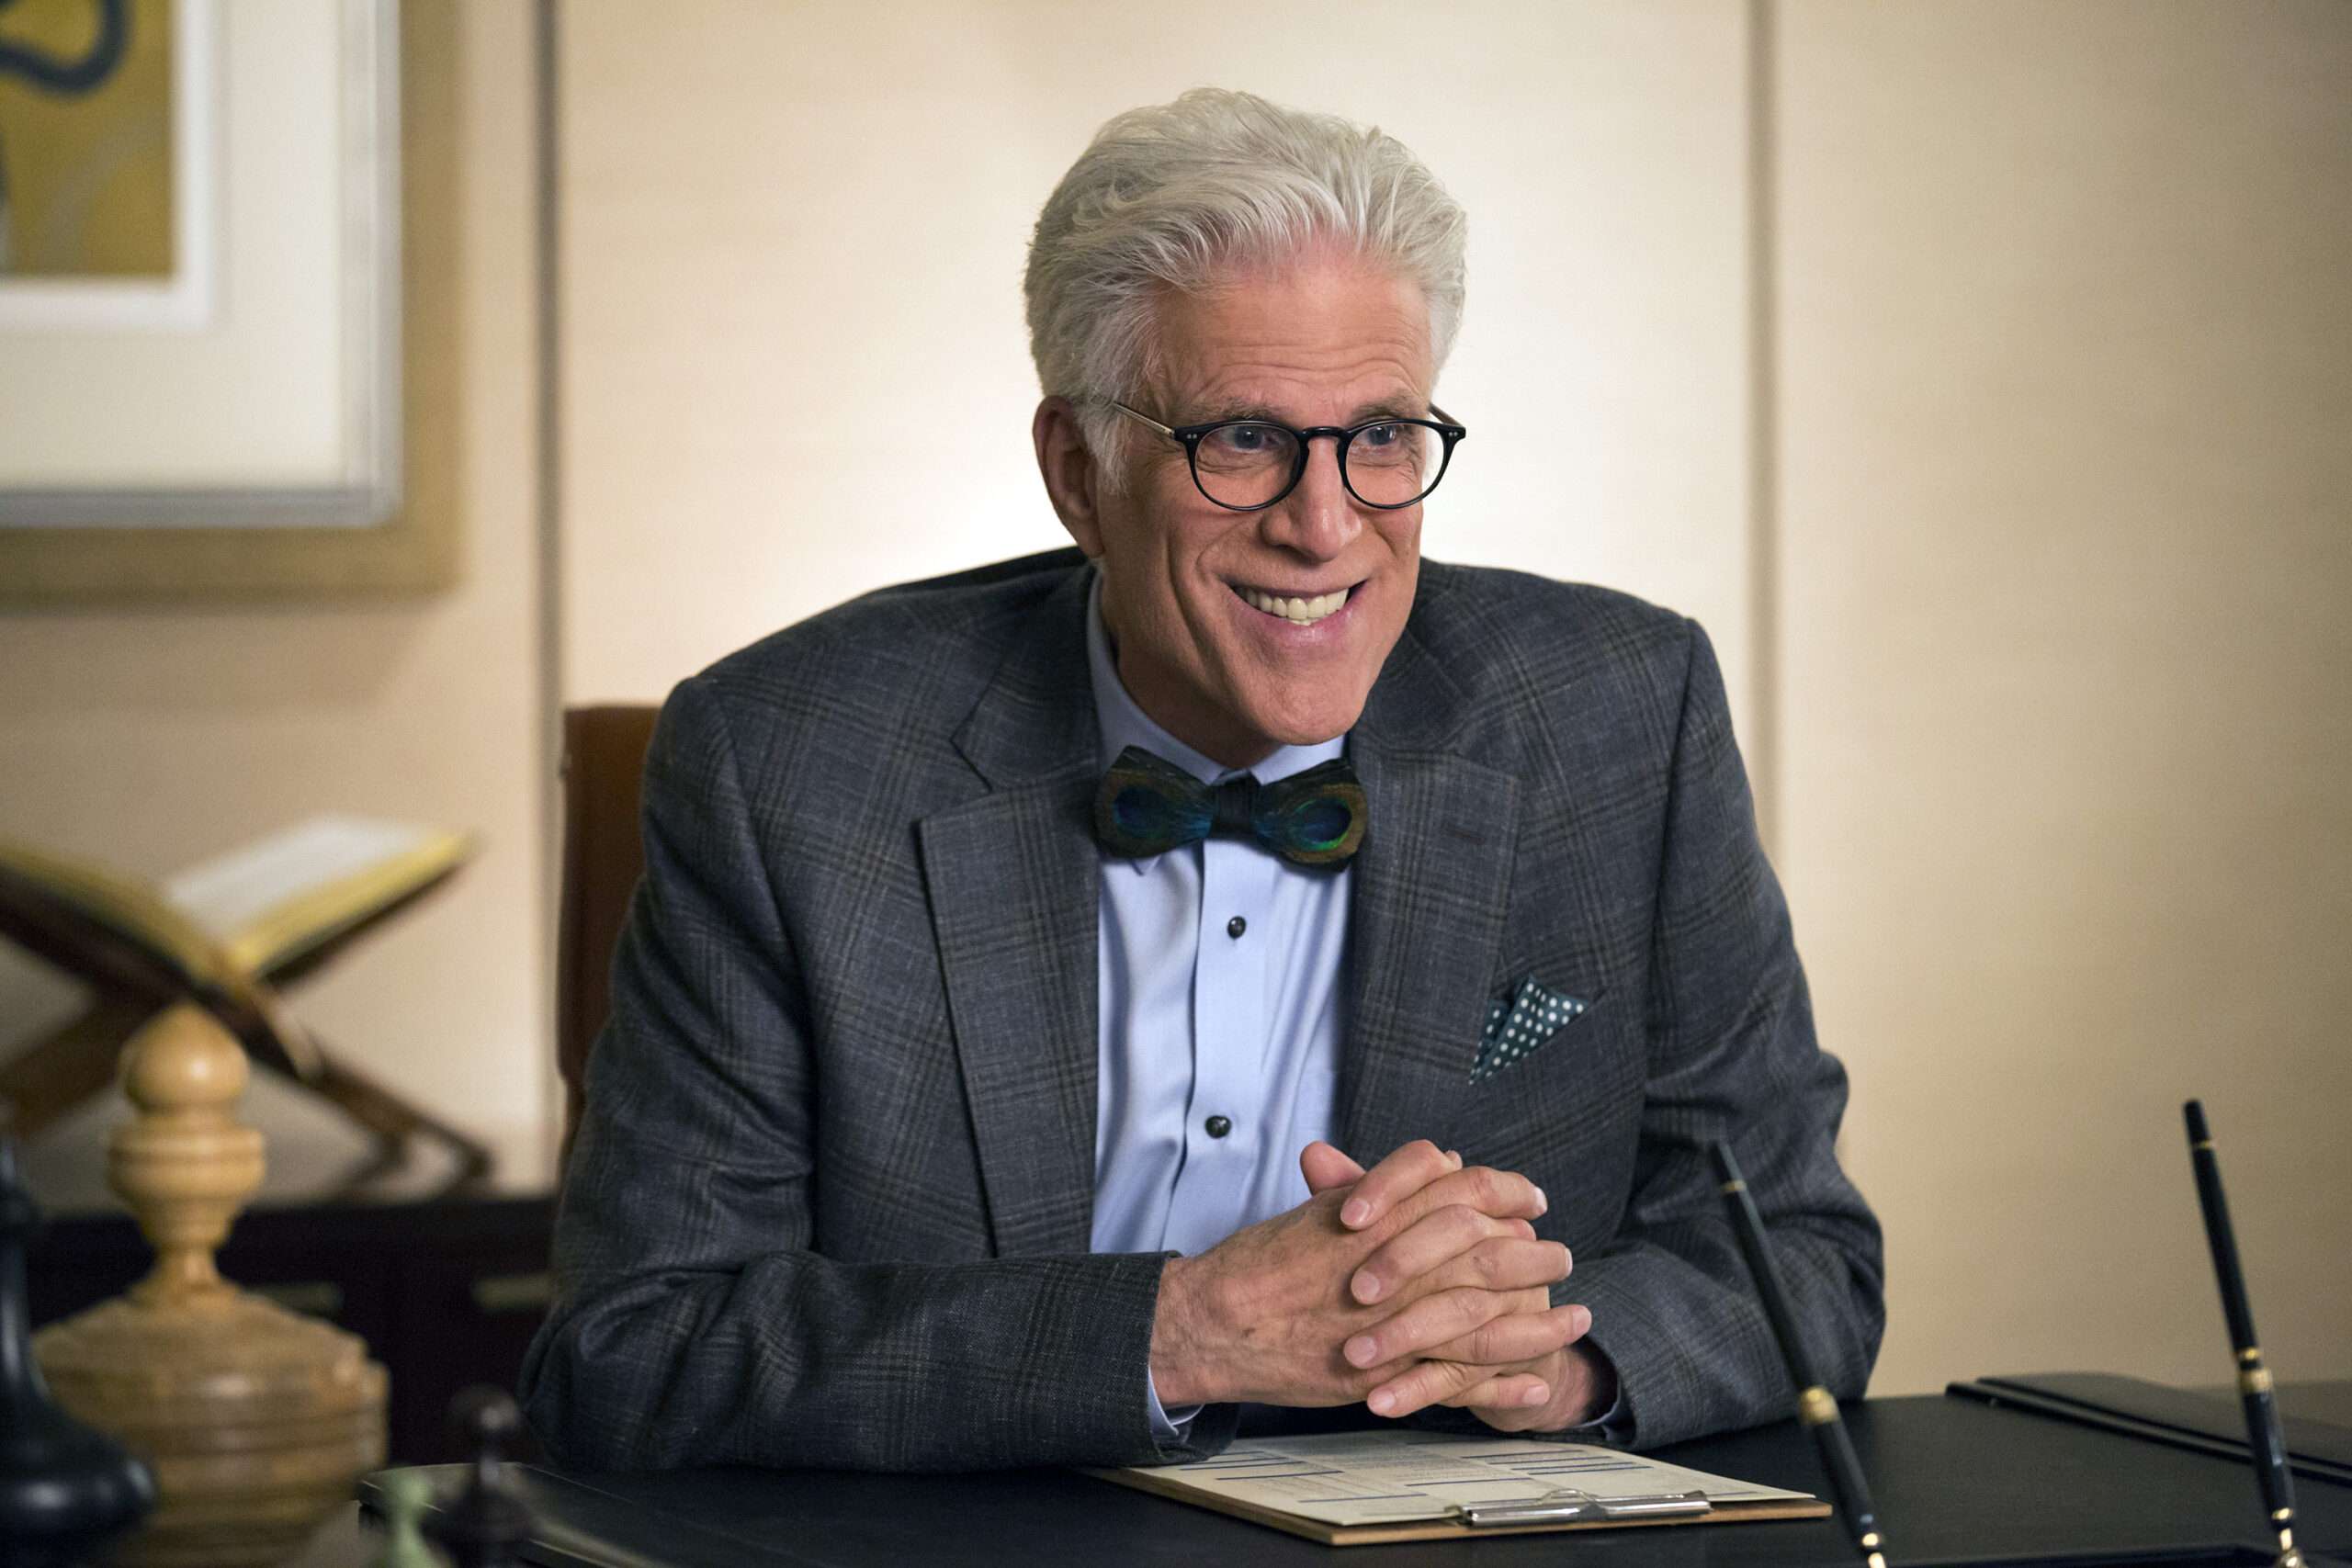 Ted Danson Biography: Awards, Movies, Wife, Net Worth, Real Name, Age, Children, Parents, Siblings